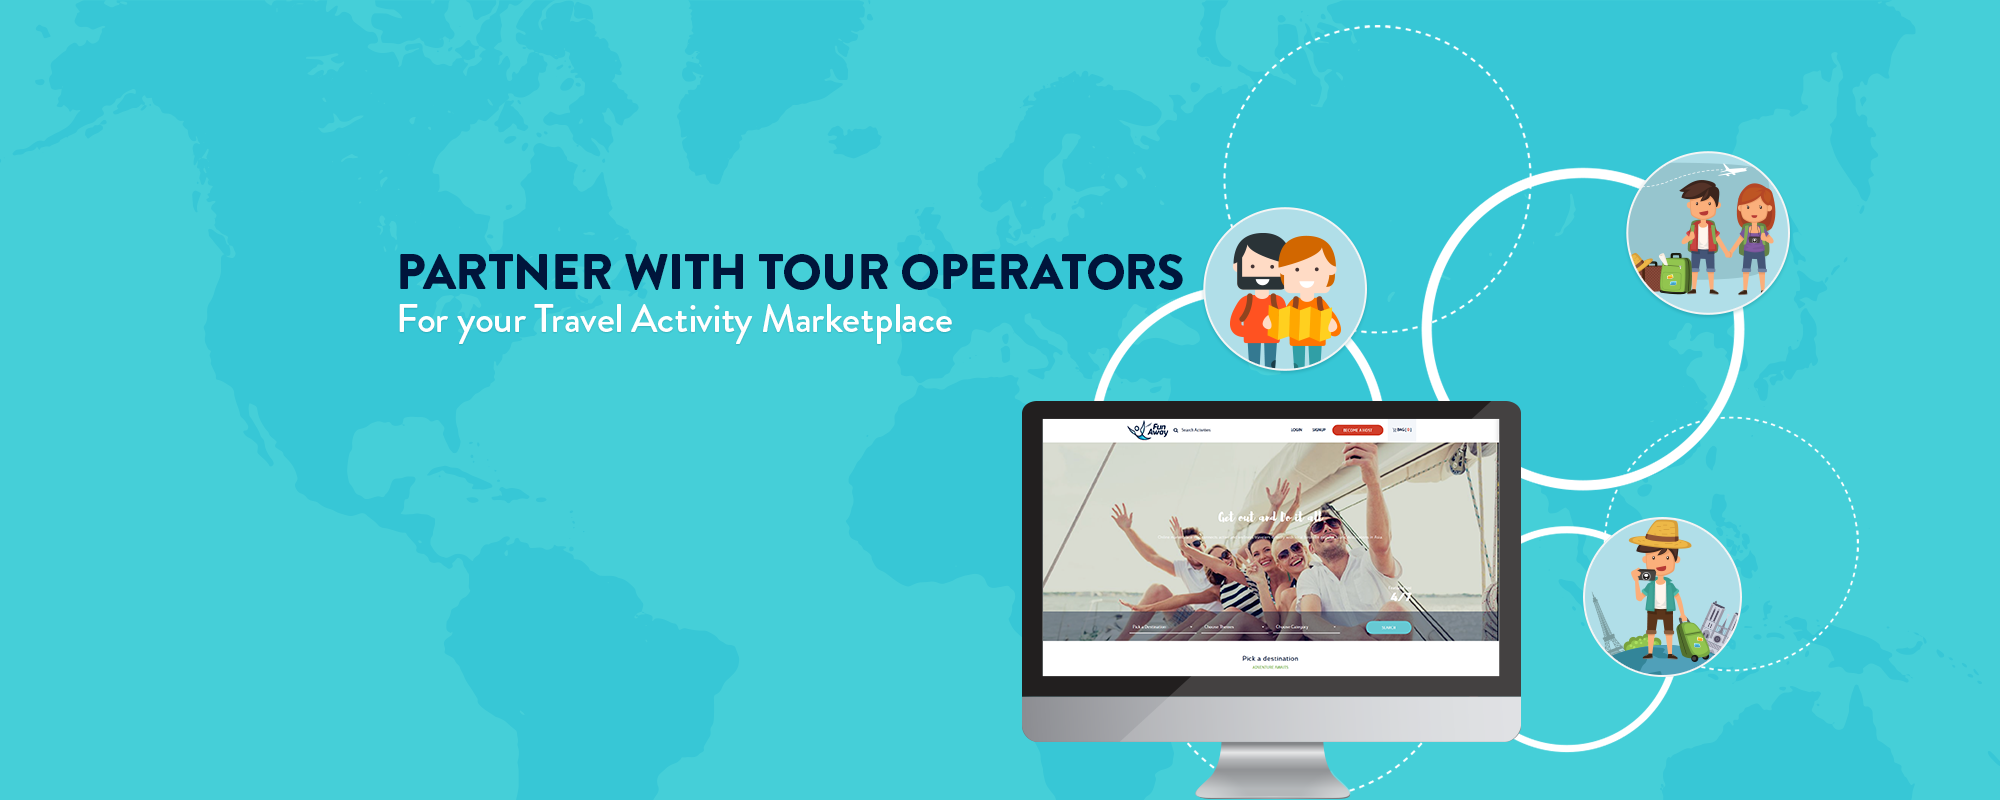 How to Connect with Tour Operators for Your Travel Activity Booking Marketplace